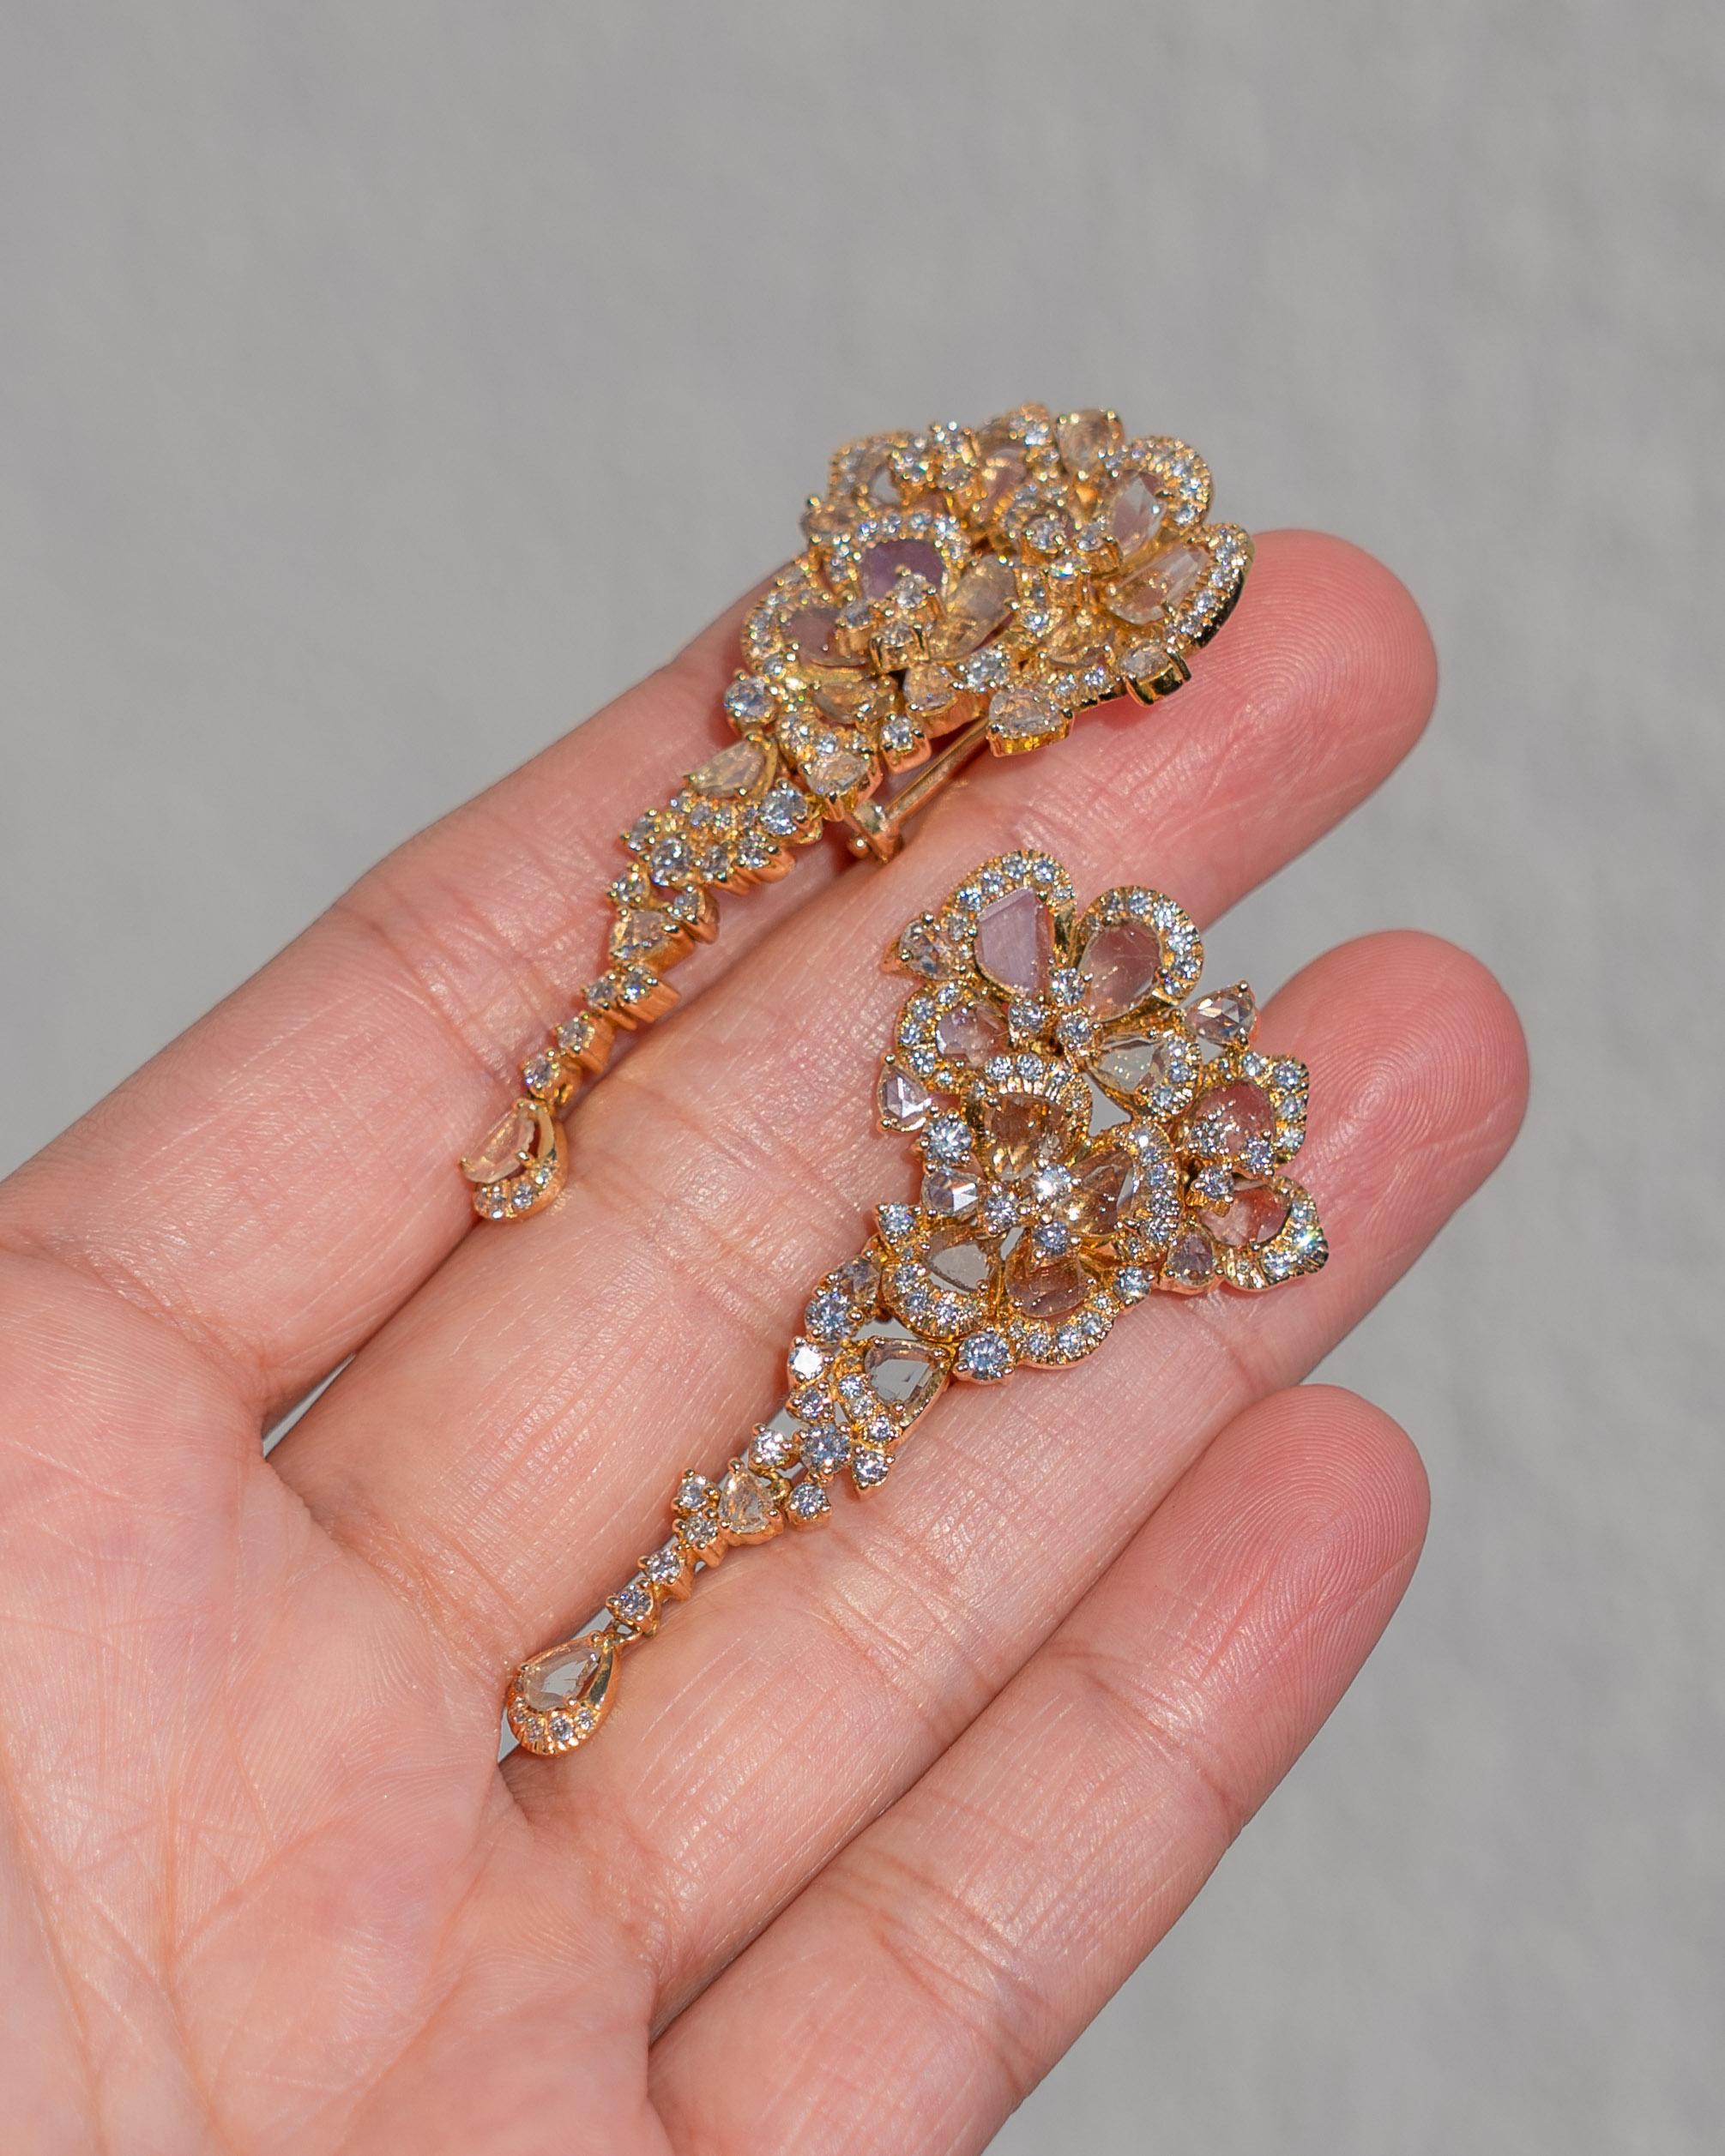 Make a statement with these beautiful pair of rose-cut Diamond dangle earrings, set in solid 18K Yellow Gold. The total weight of the Diamonds are 5.52 carats, all VS quality. The length is around 2.25 inches long, and they come with a secure omega